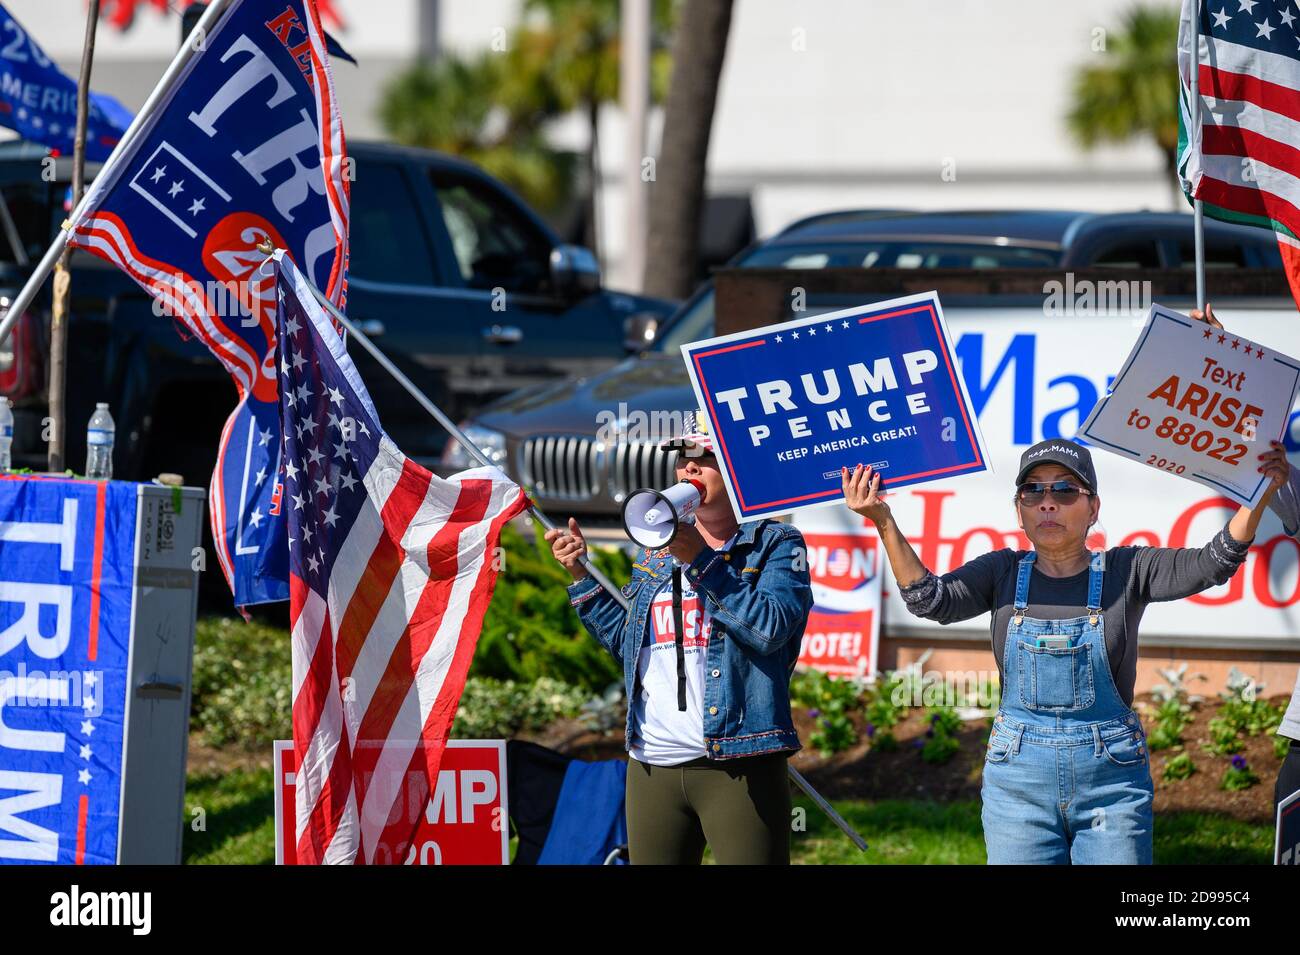 Houston, Texas, USA. 3rd Nov, 2020. A loud group of supporters of Donald Trump outside a polling station in Harris County, Houston, Texas, USA. Credit: Michelmond/Alamy Live News. Stock Photo